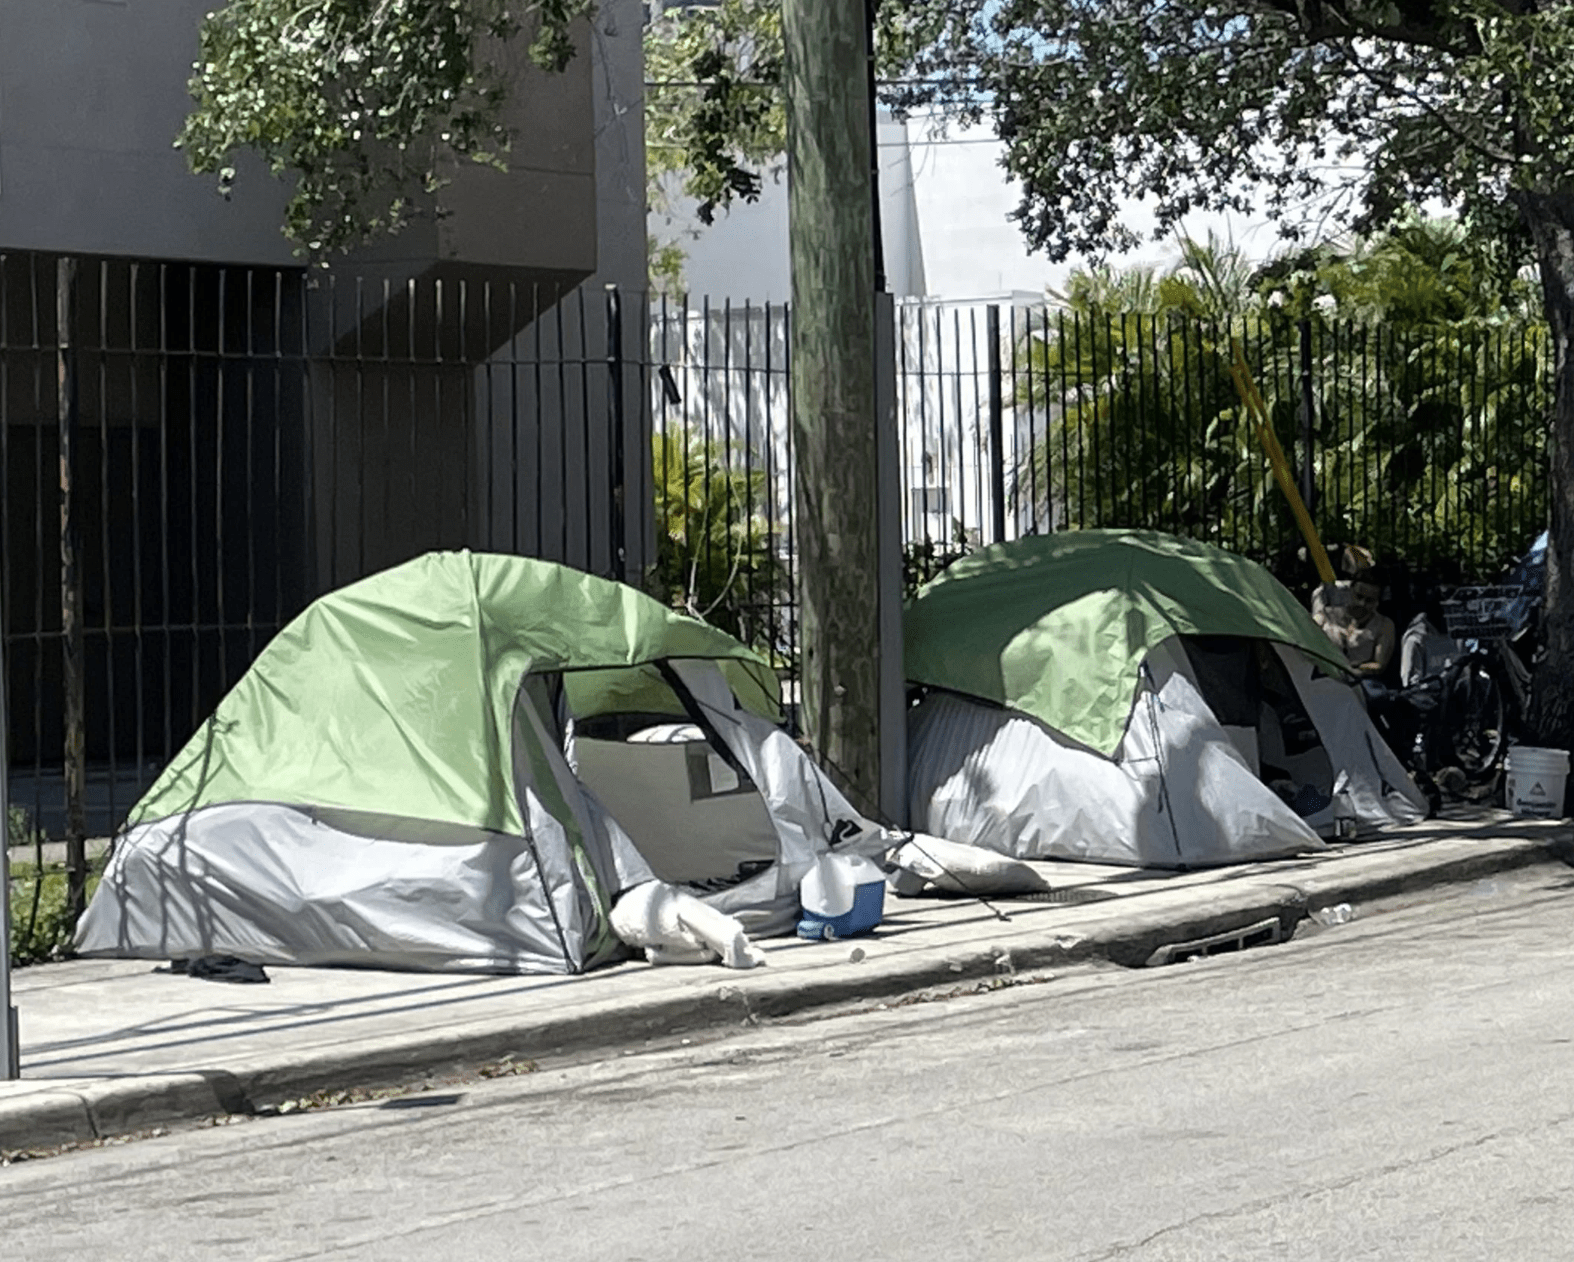 Blocks from Miami’s Jackson Memorial Hospital, people who are homeless set up tents on a sidewalk and under the shade of a live oak tree.